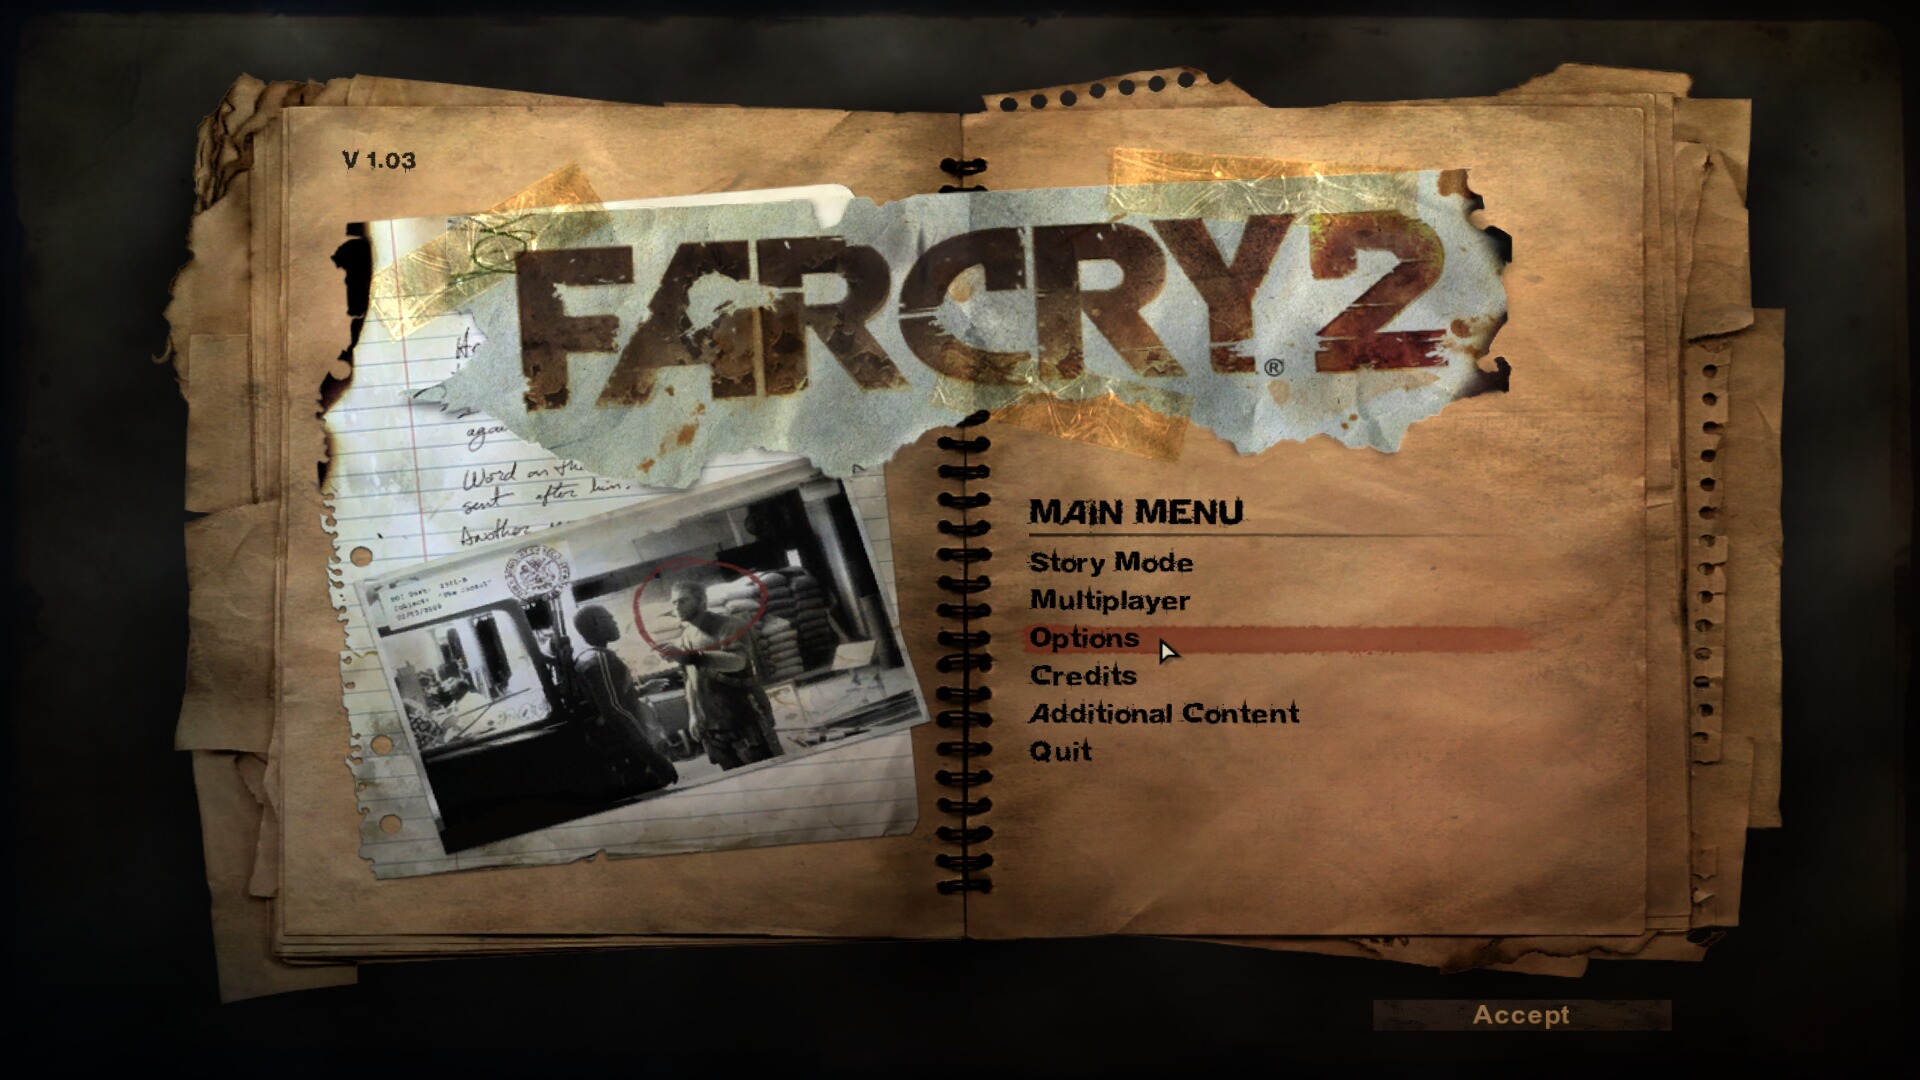  Customer reviews: Far Cry 2: Fortune's Edition